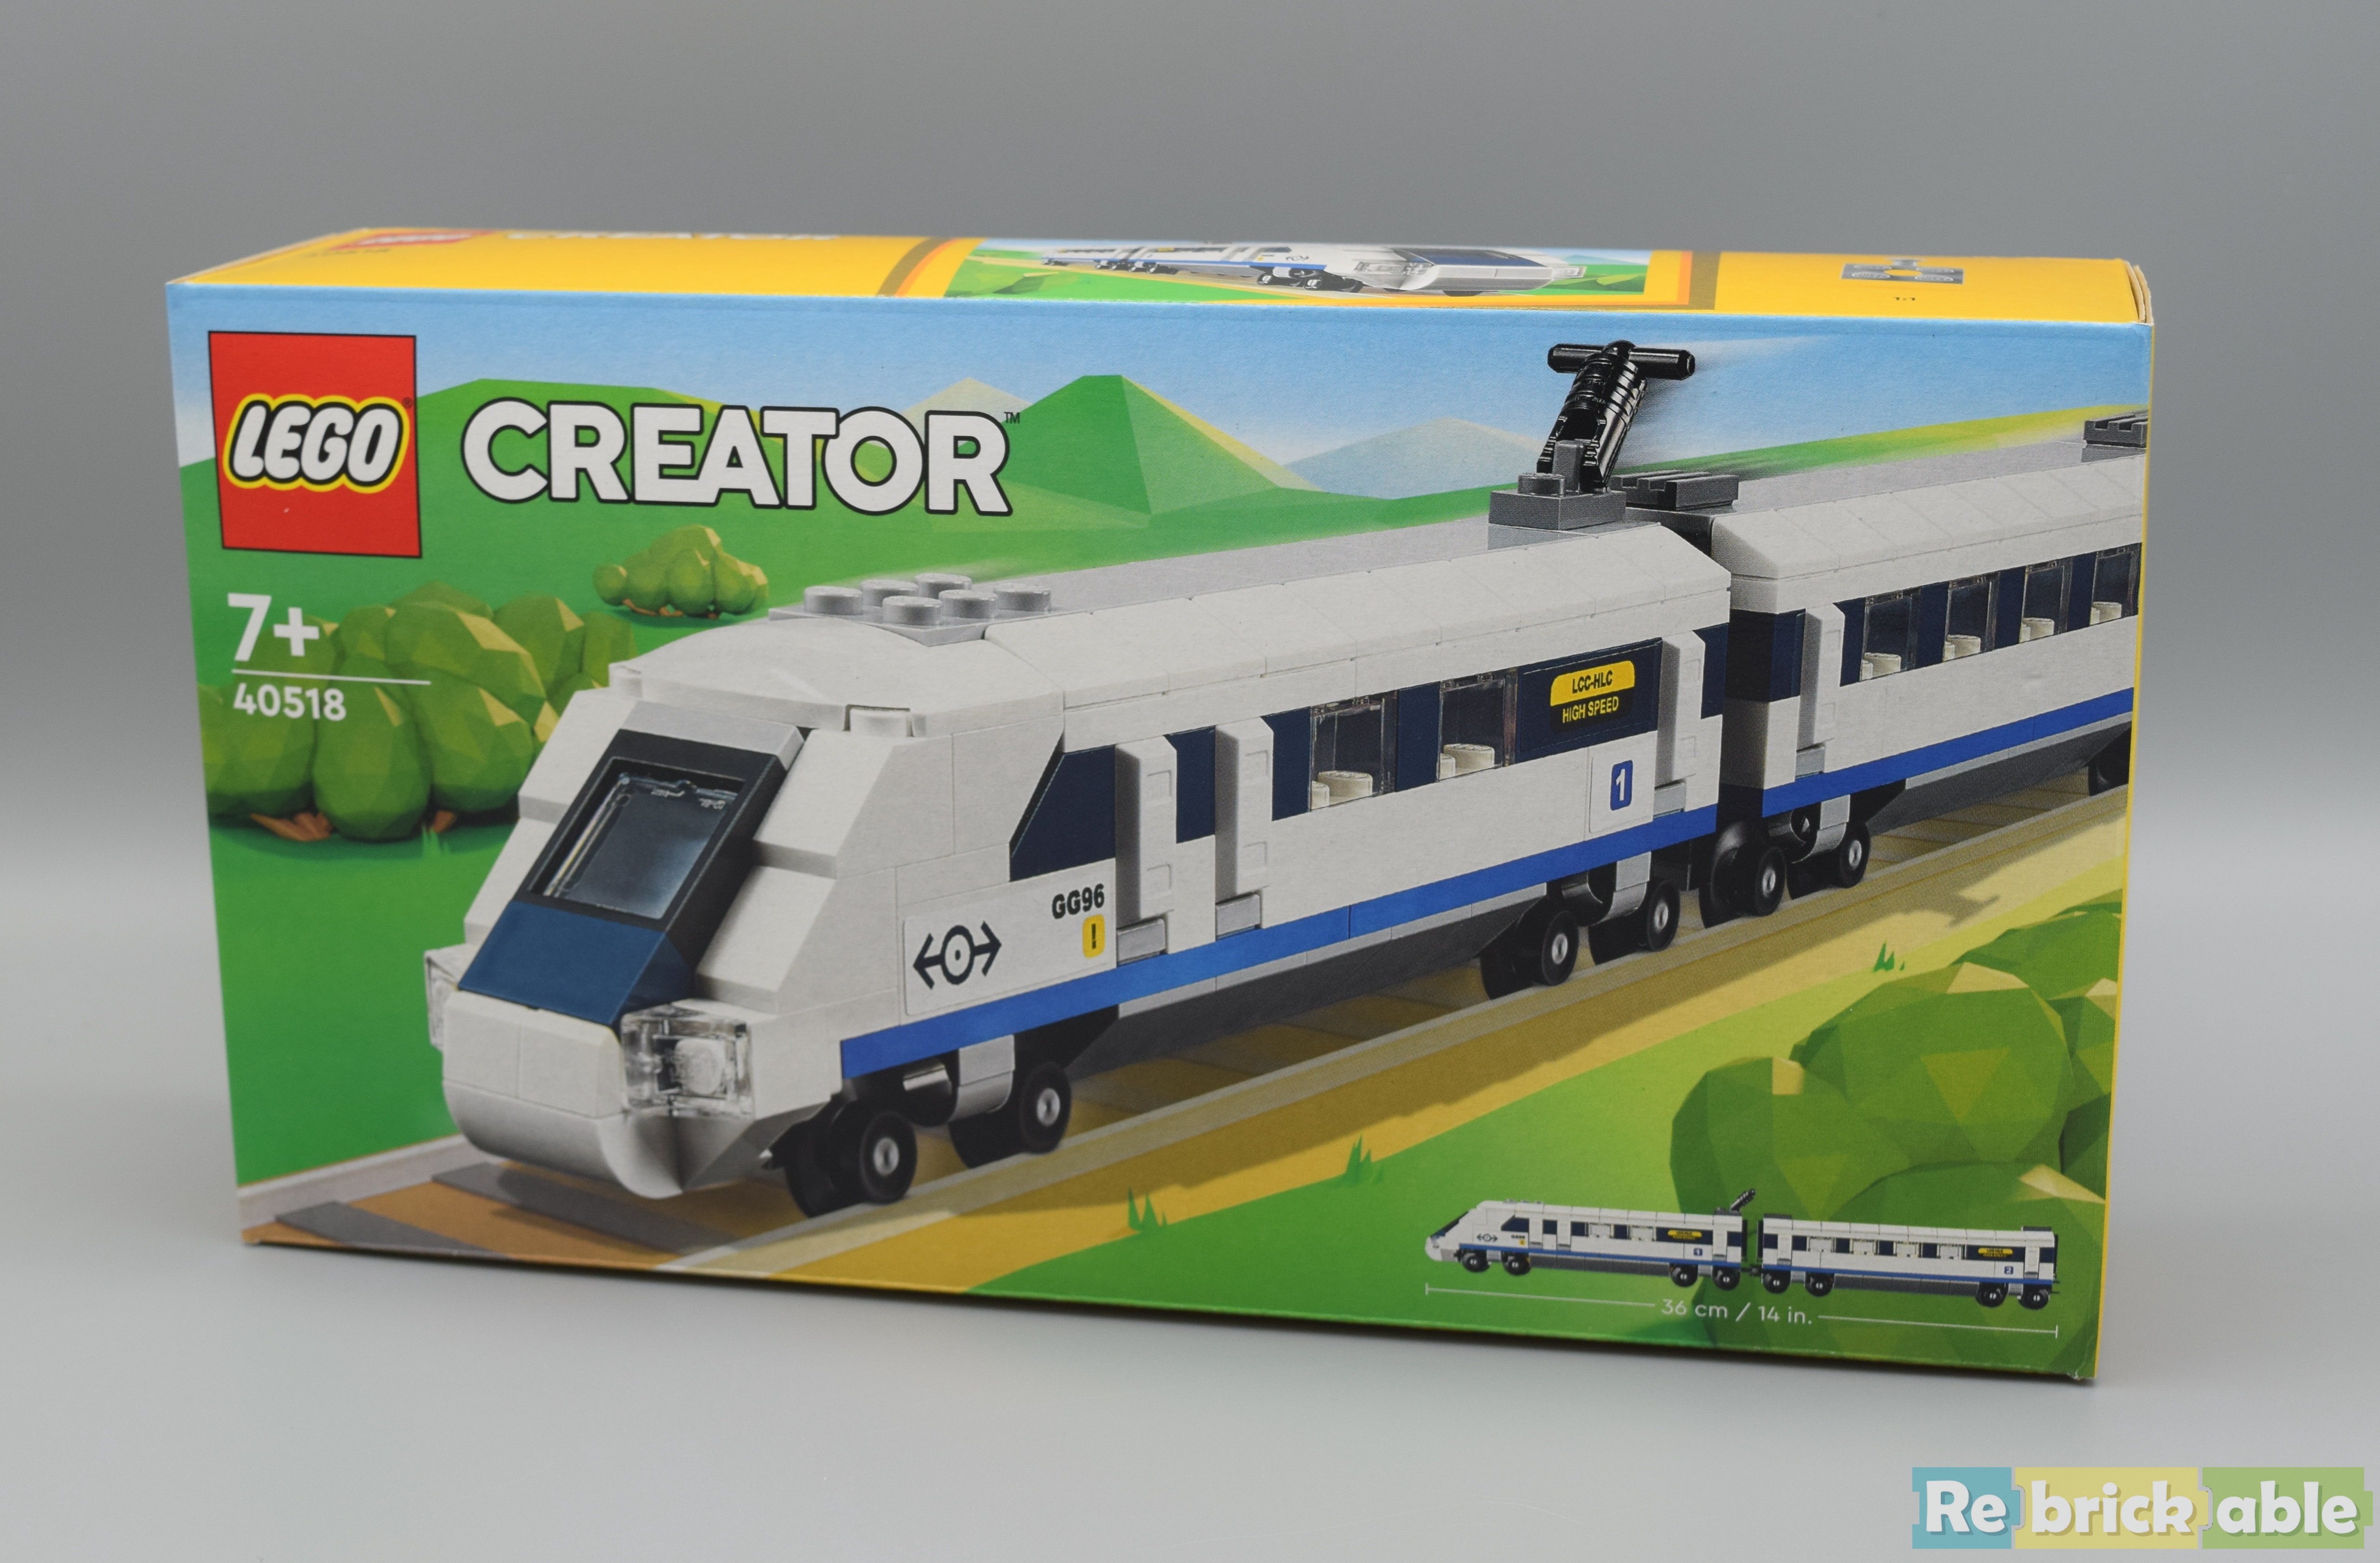 Review: 40518-1 - High-Speed Train﻿ | Rebrickable - Build with LEGO